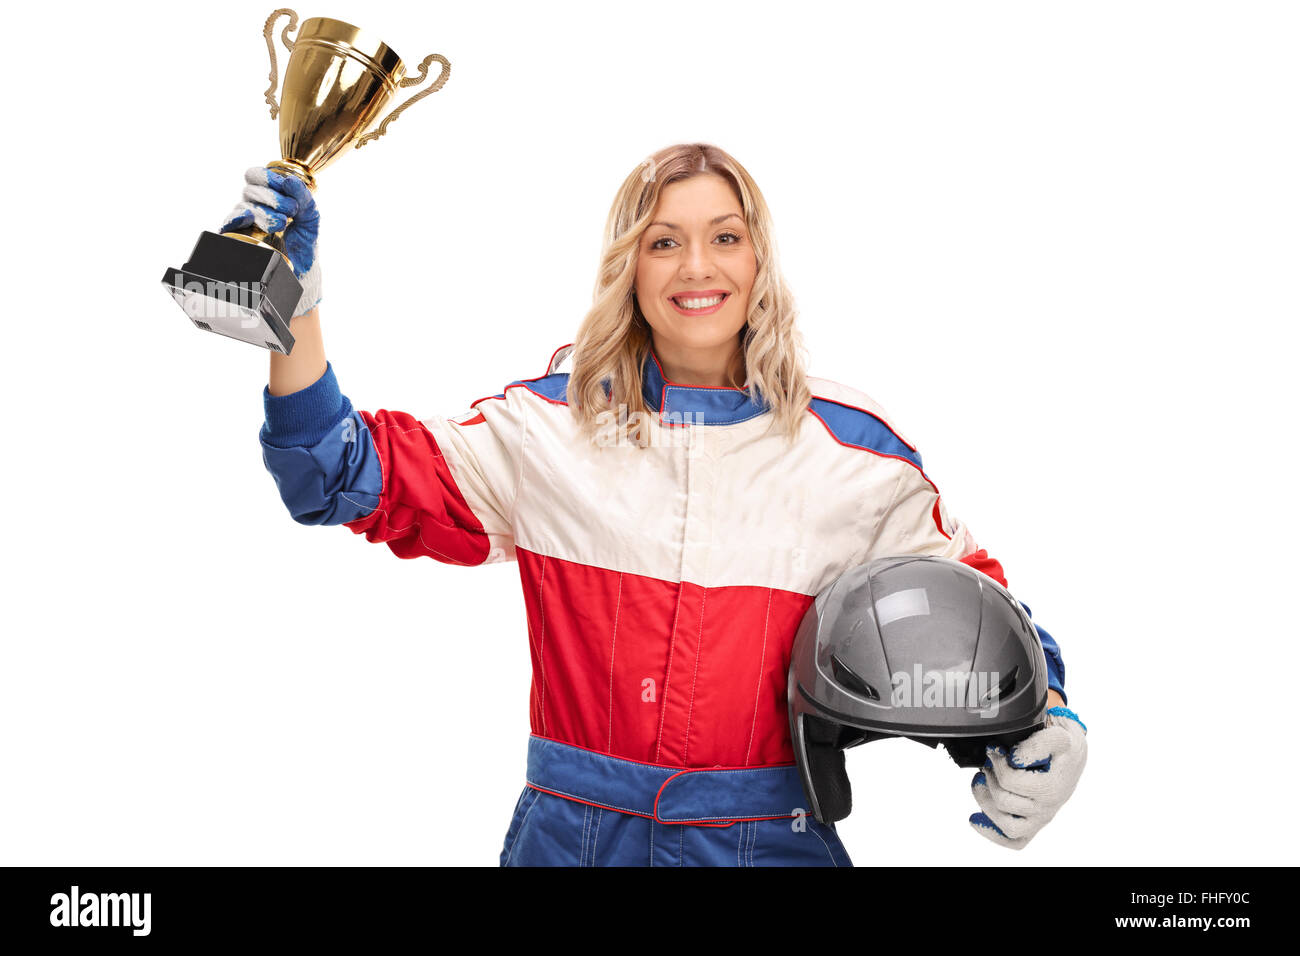 Female car racing champion holding a trophy and looking at the camera isolated on white background Stock Photo